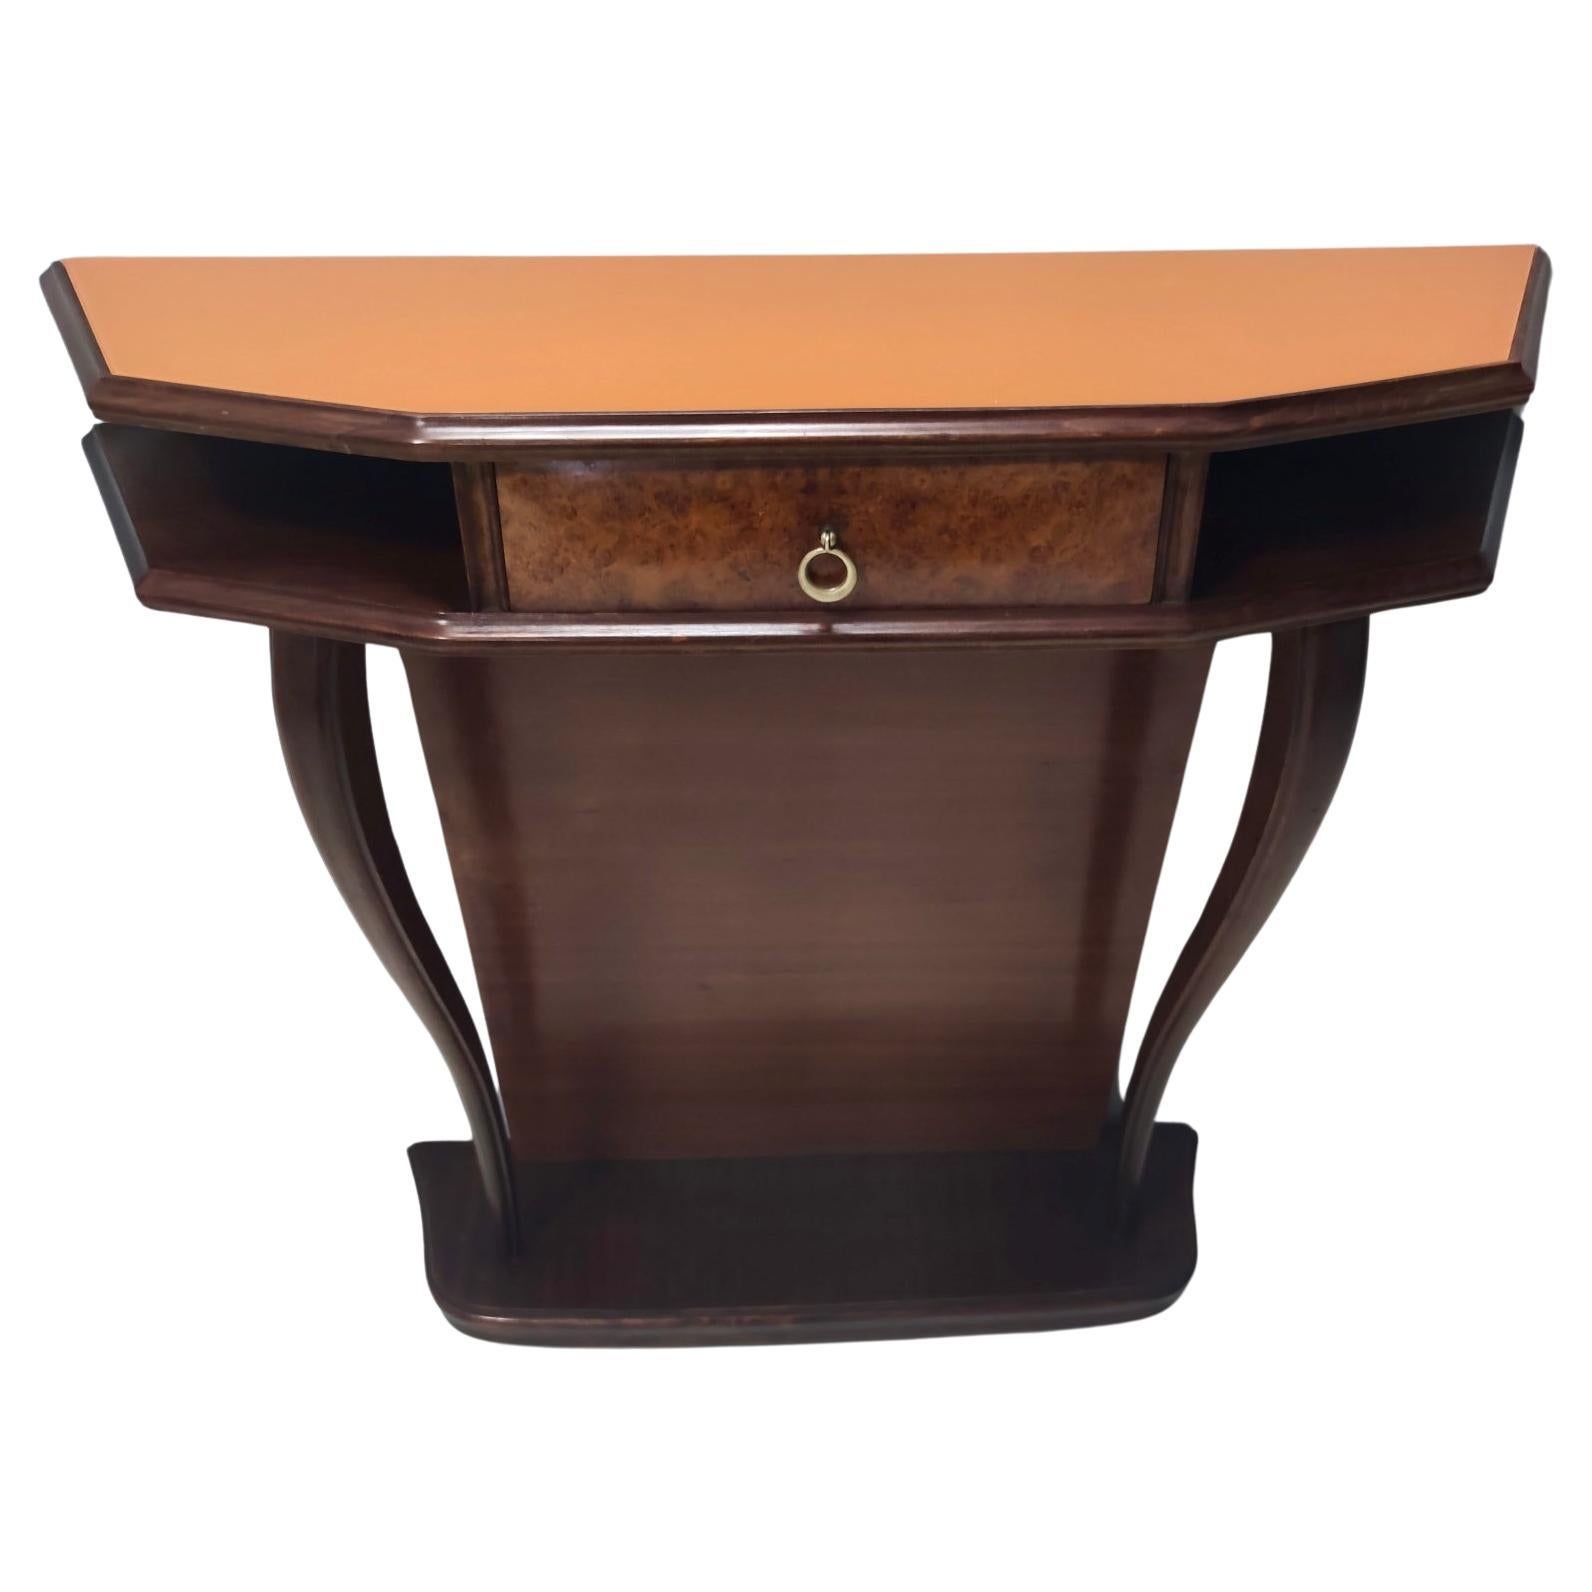 Vintage Beech and Walnut Root Console Table with an Orange Glass Top, Italy